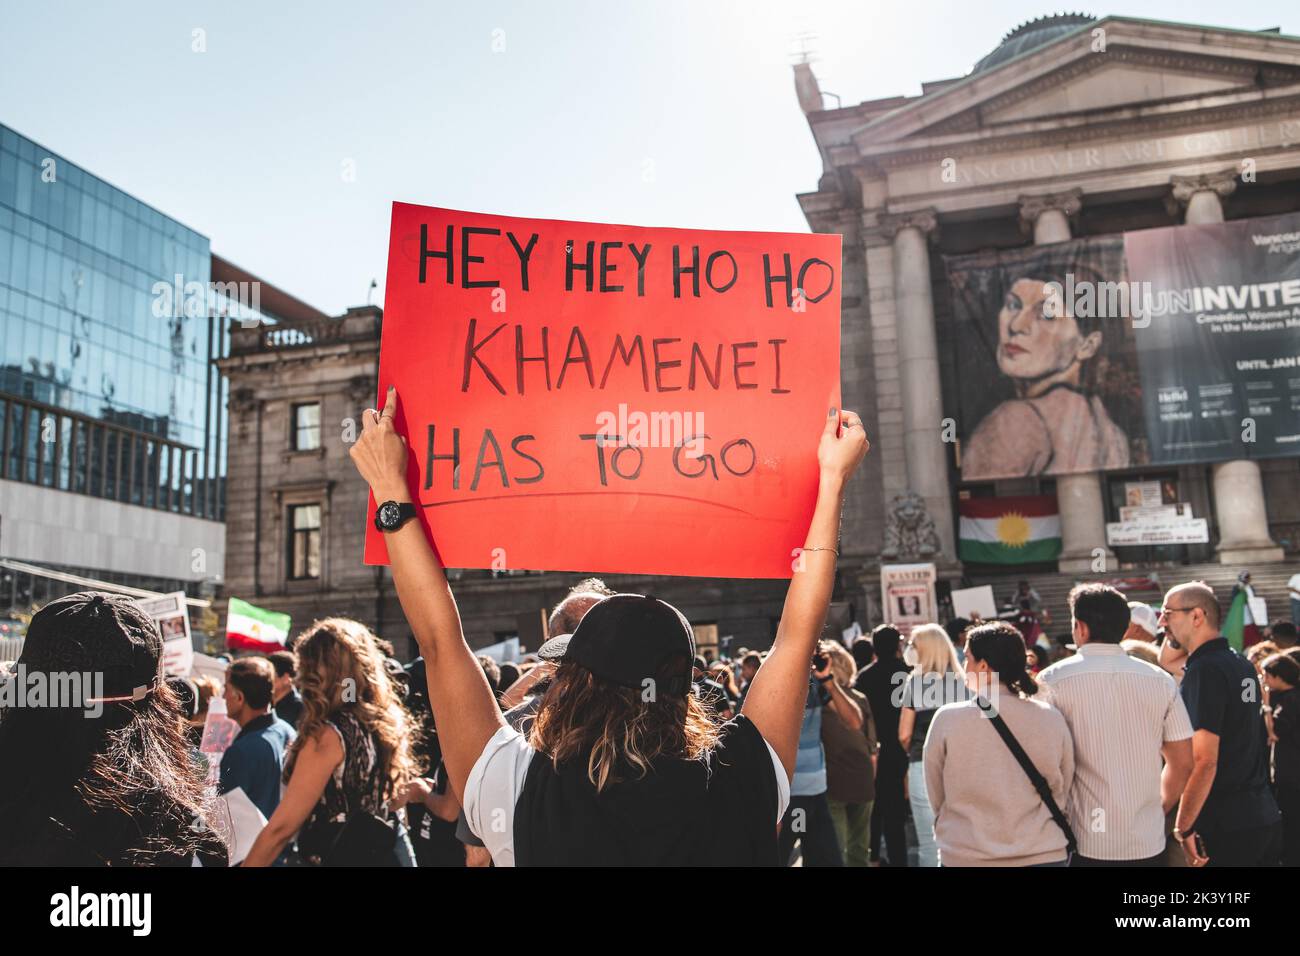 Vancouver, Canada - September 25,2022: Huge rally in support of Iranian protests in front of Vancouver Art Gallery. View of sign Khamenei has to go Stock Photo